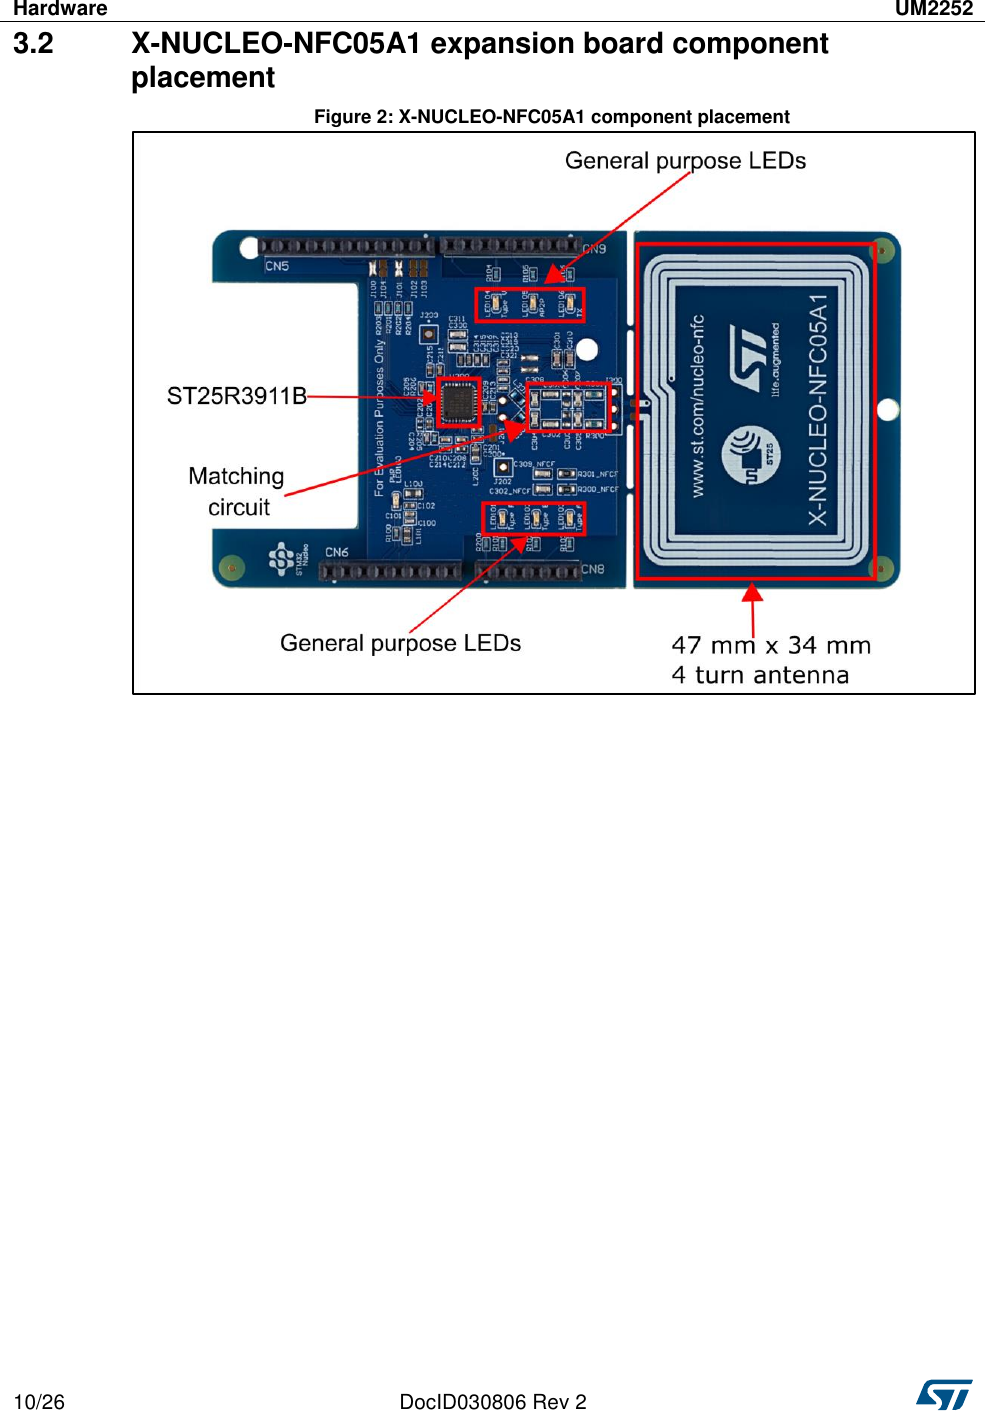 Hardware UM2252  10/26 DocID030806 Rev 2   3.2  X-NUCLEO-NFC05A1 expansion board component placement Figure 2: X-NUCLEO-NFC05A1 component placement  